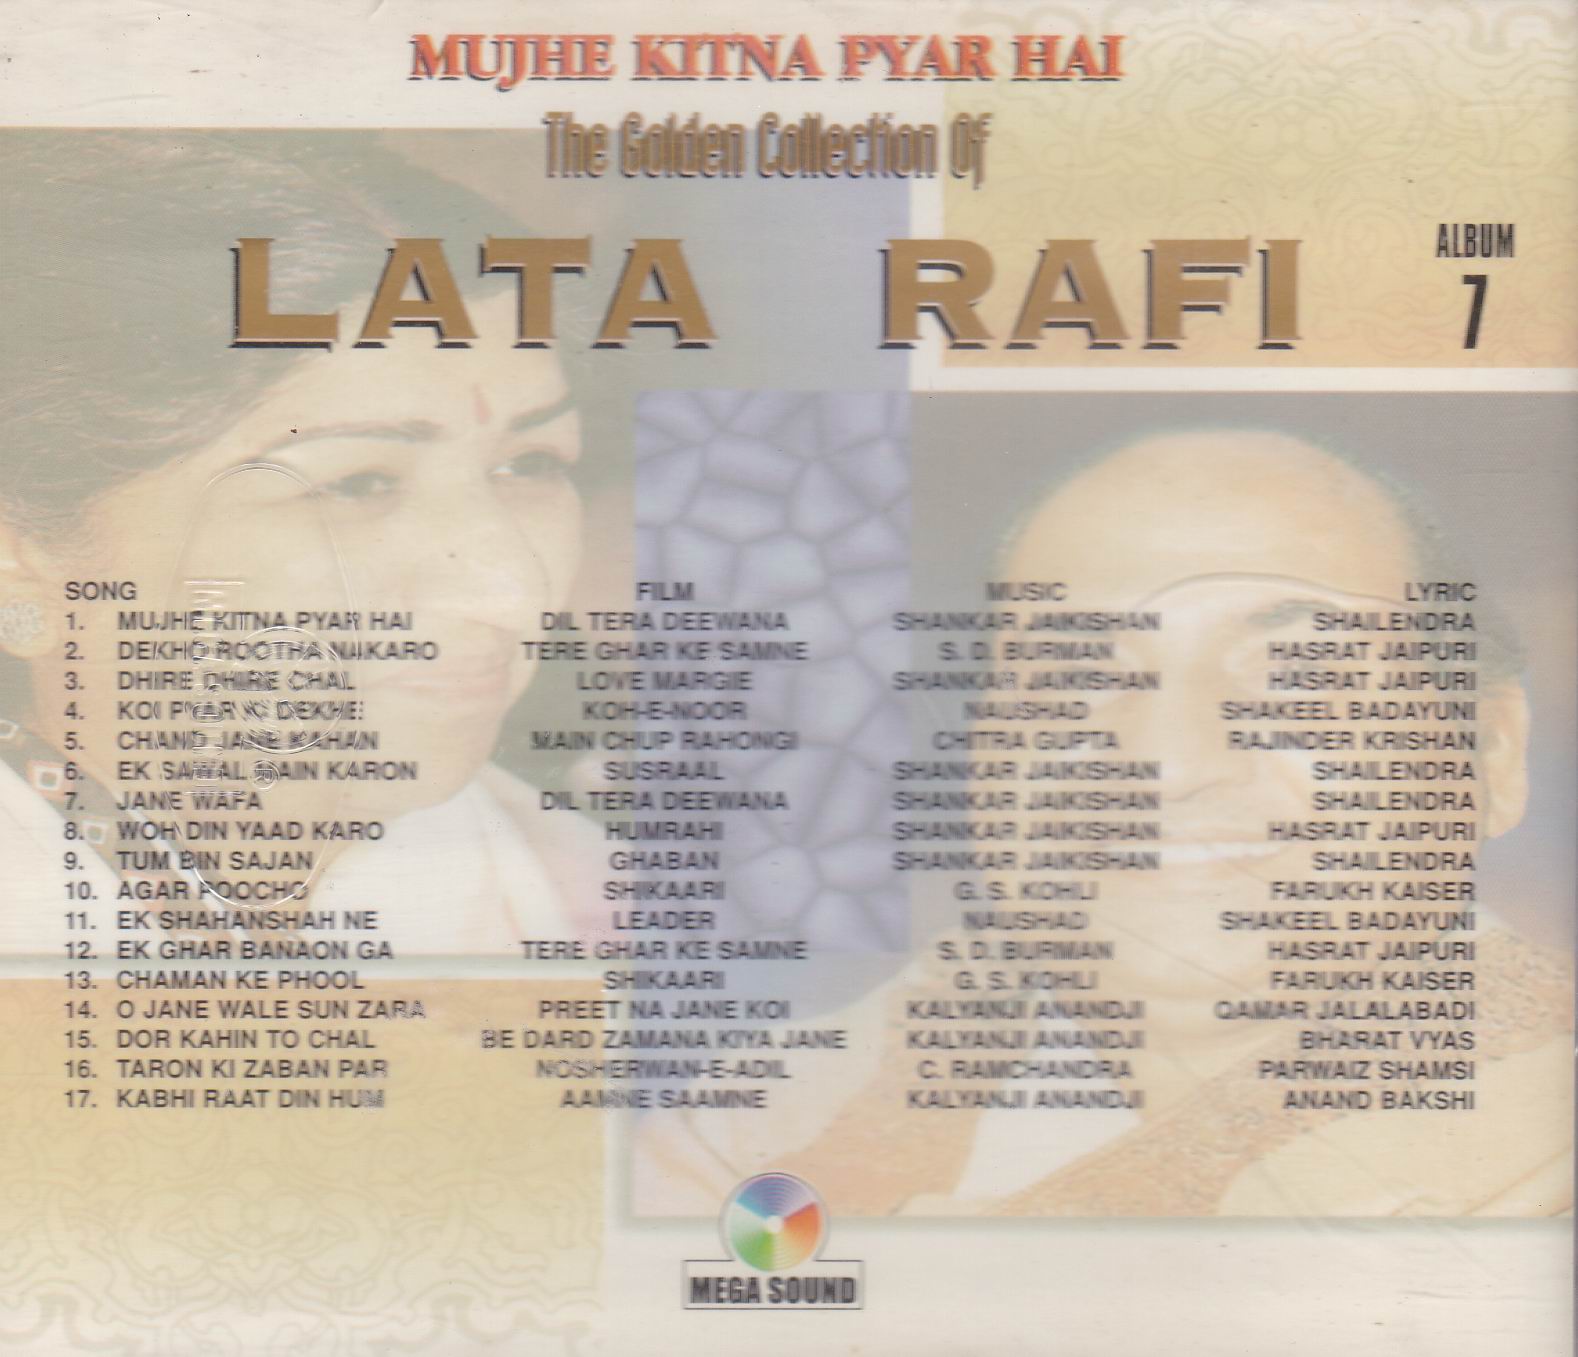 Golden Collection Of Lata Rafi Vol 7 MS CD Superb Recording - Click Image to Close